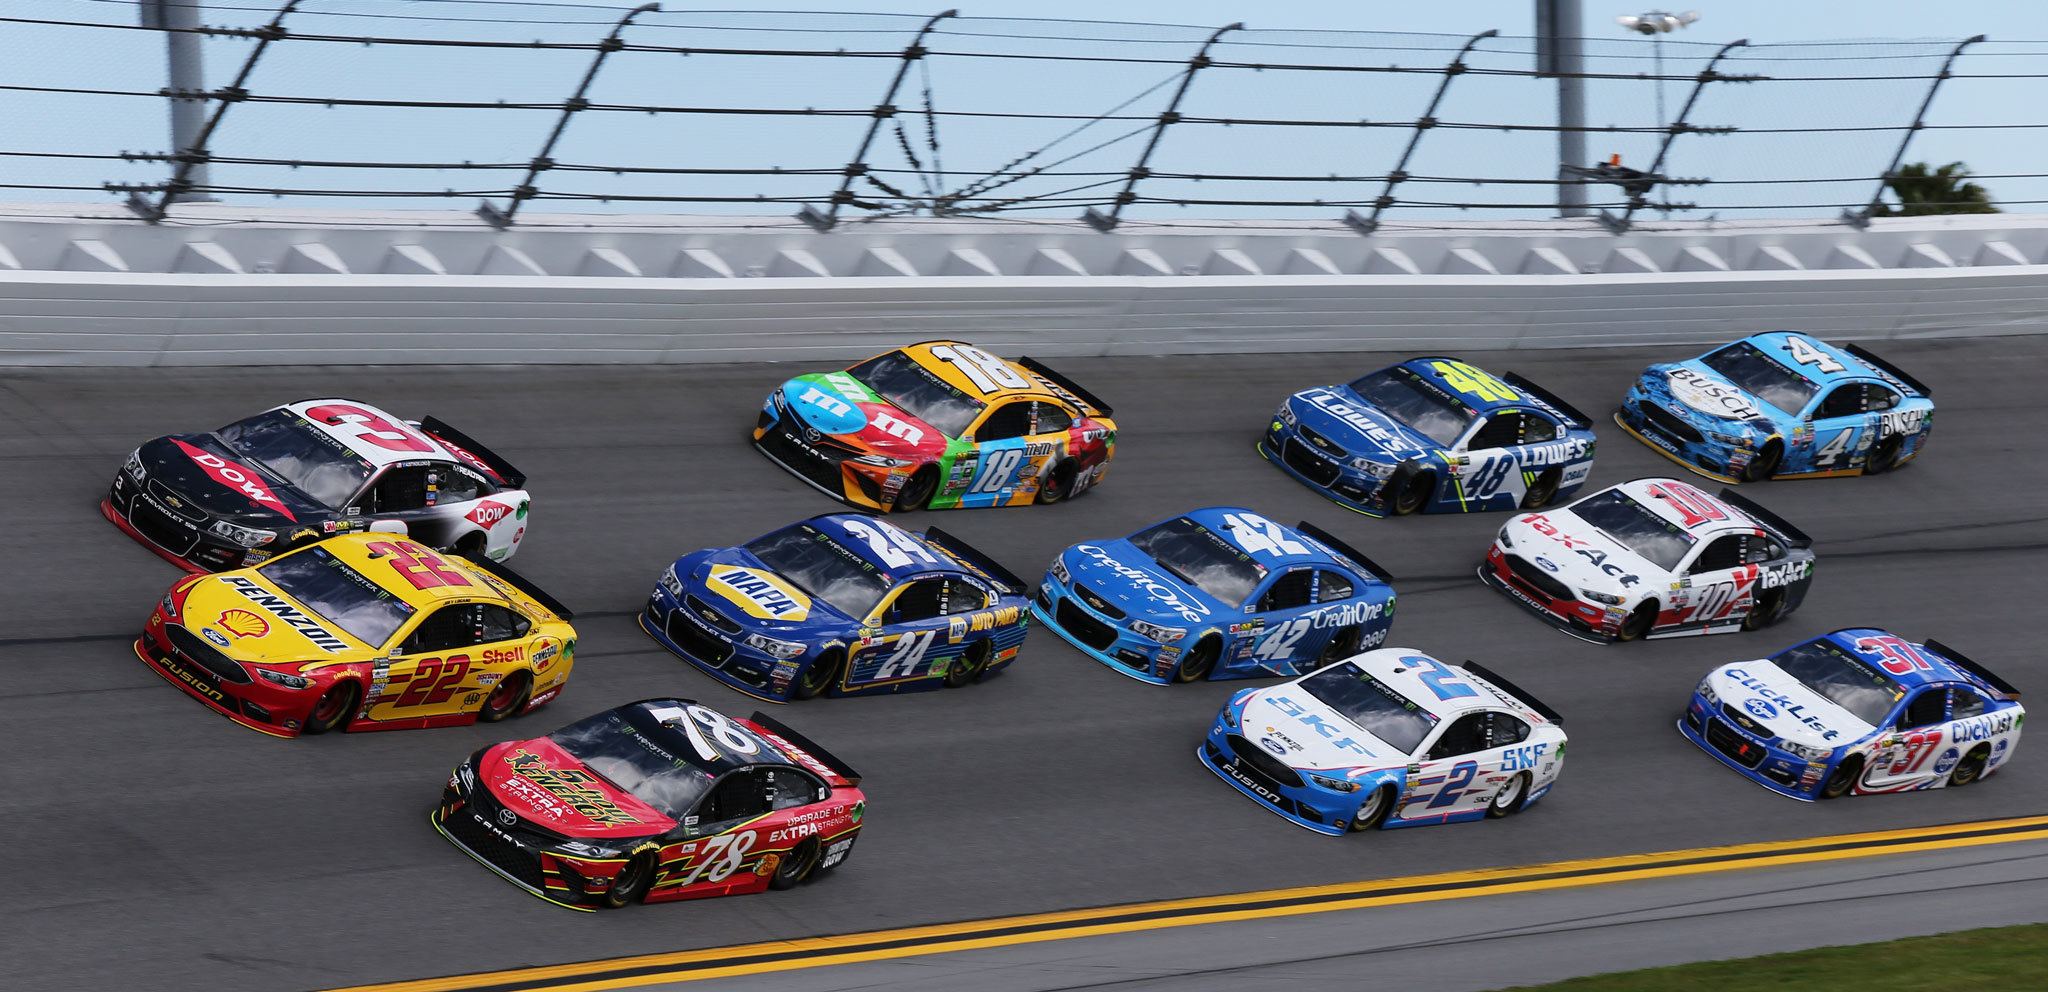 (Jerry Markland | NASCAR Media) Martin Truex Jr. (78), Joey Logano (22) and Austin Dillon (3) lead a pack of cars during the weather delayed Monster Energy NASCAR Cup Series Advance Auto Parts Clash at Daytona International Speedway on Sunday.